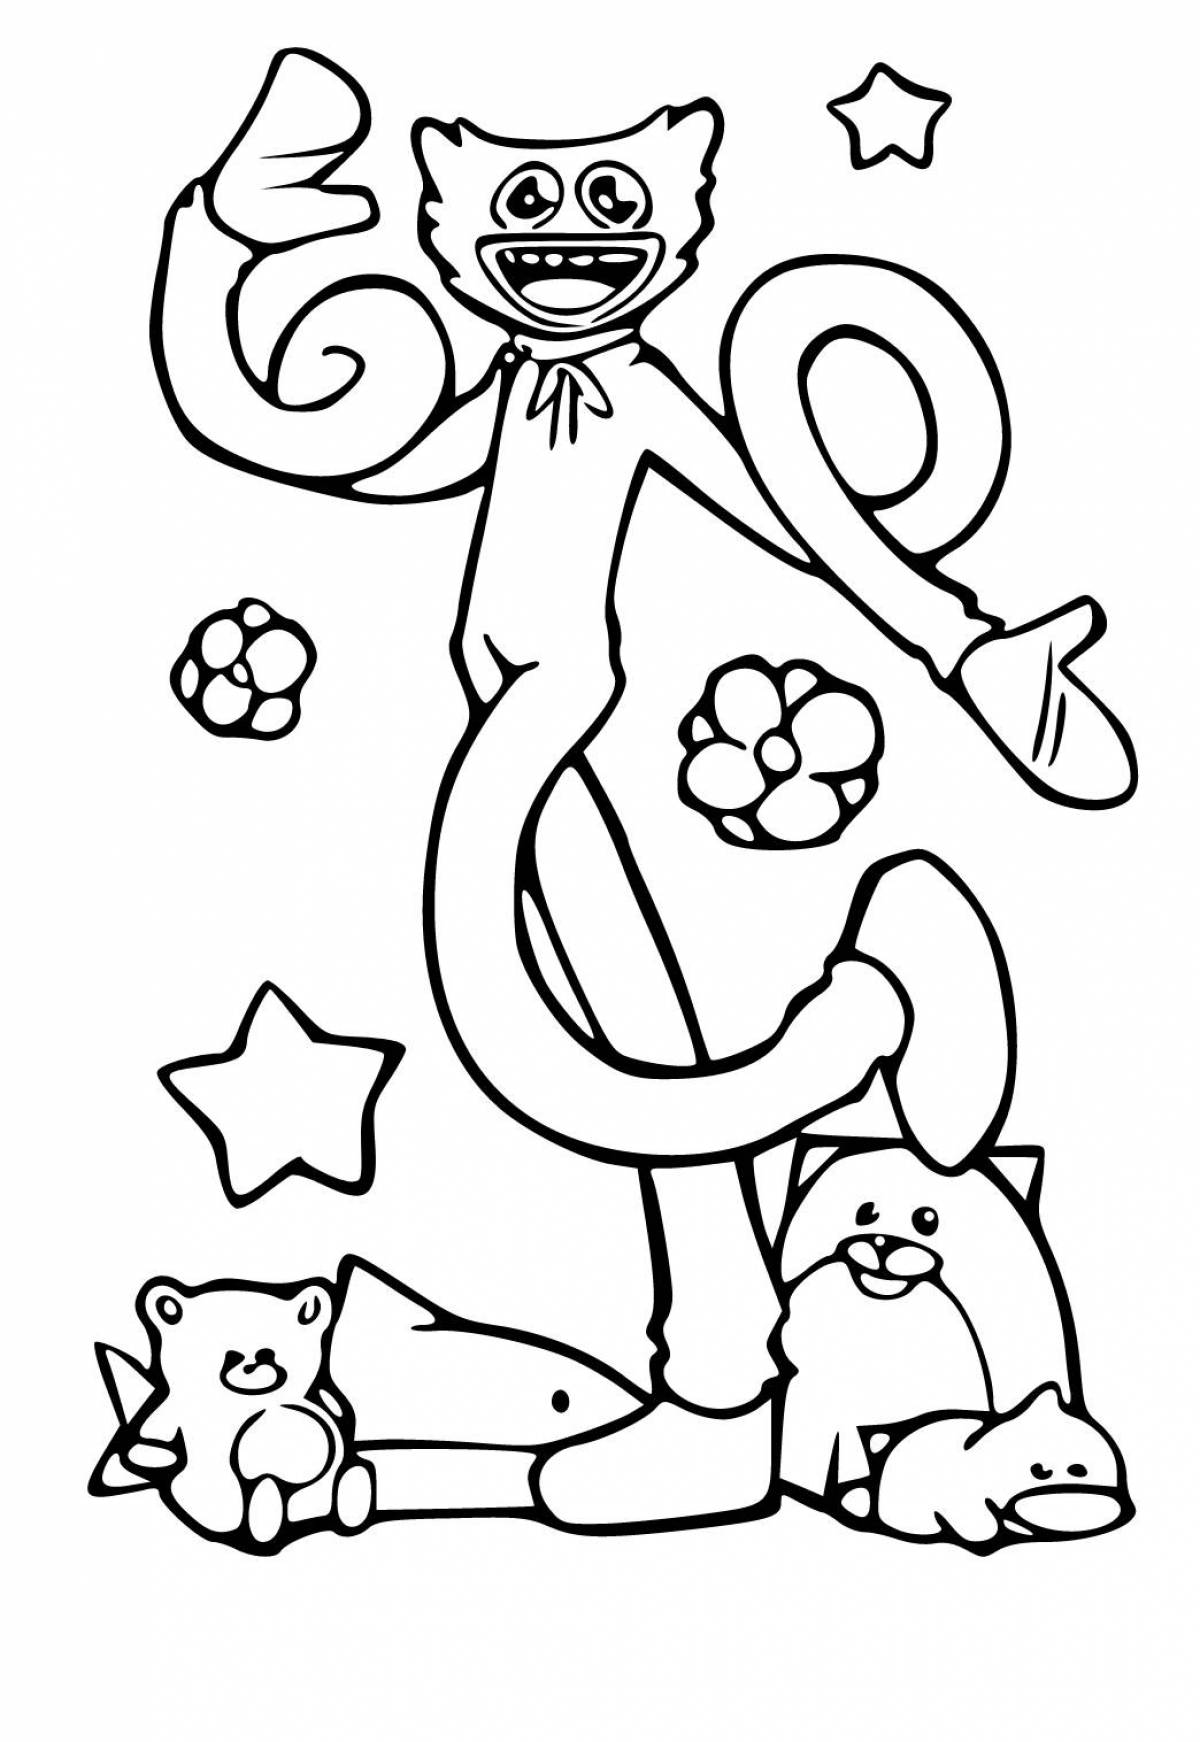 Dazzling huggies waggie coloring page